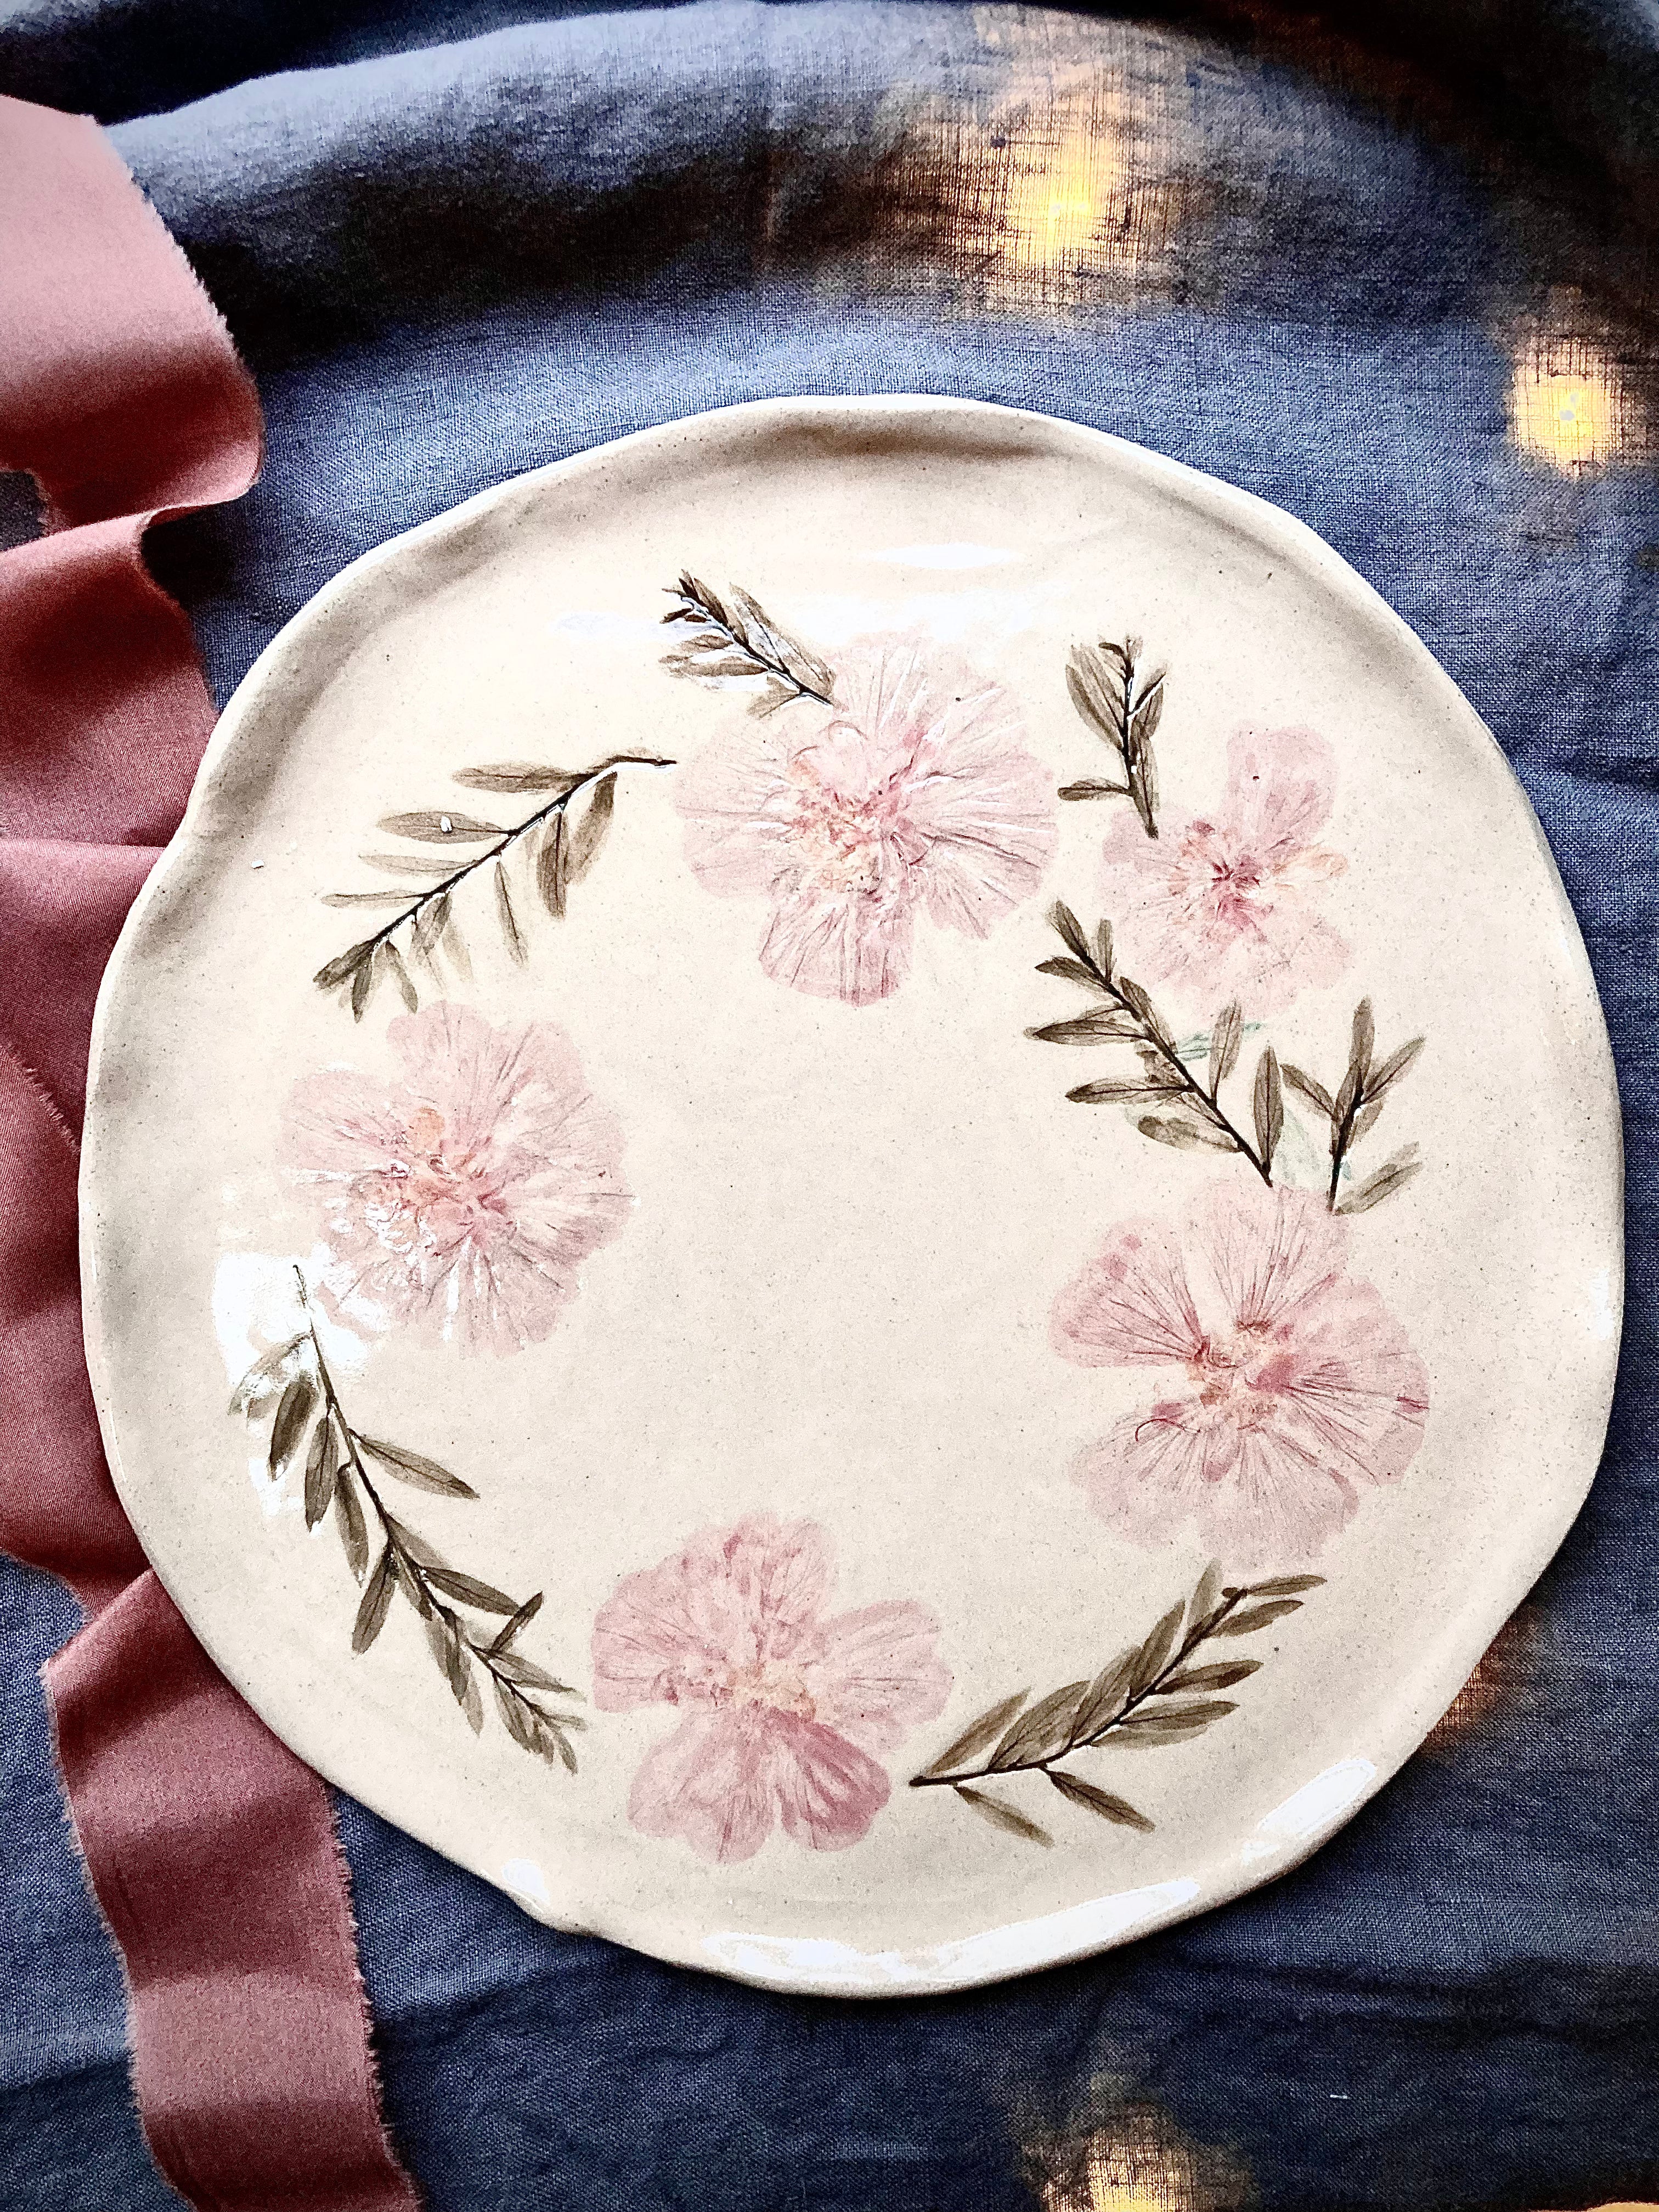 Floral wreath plate